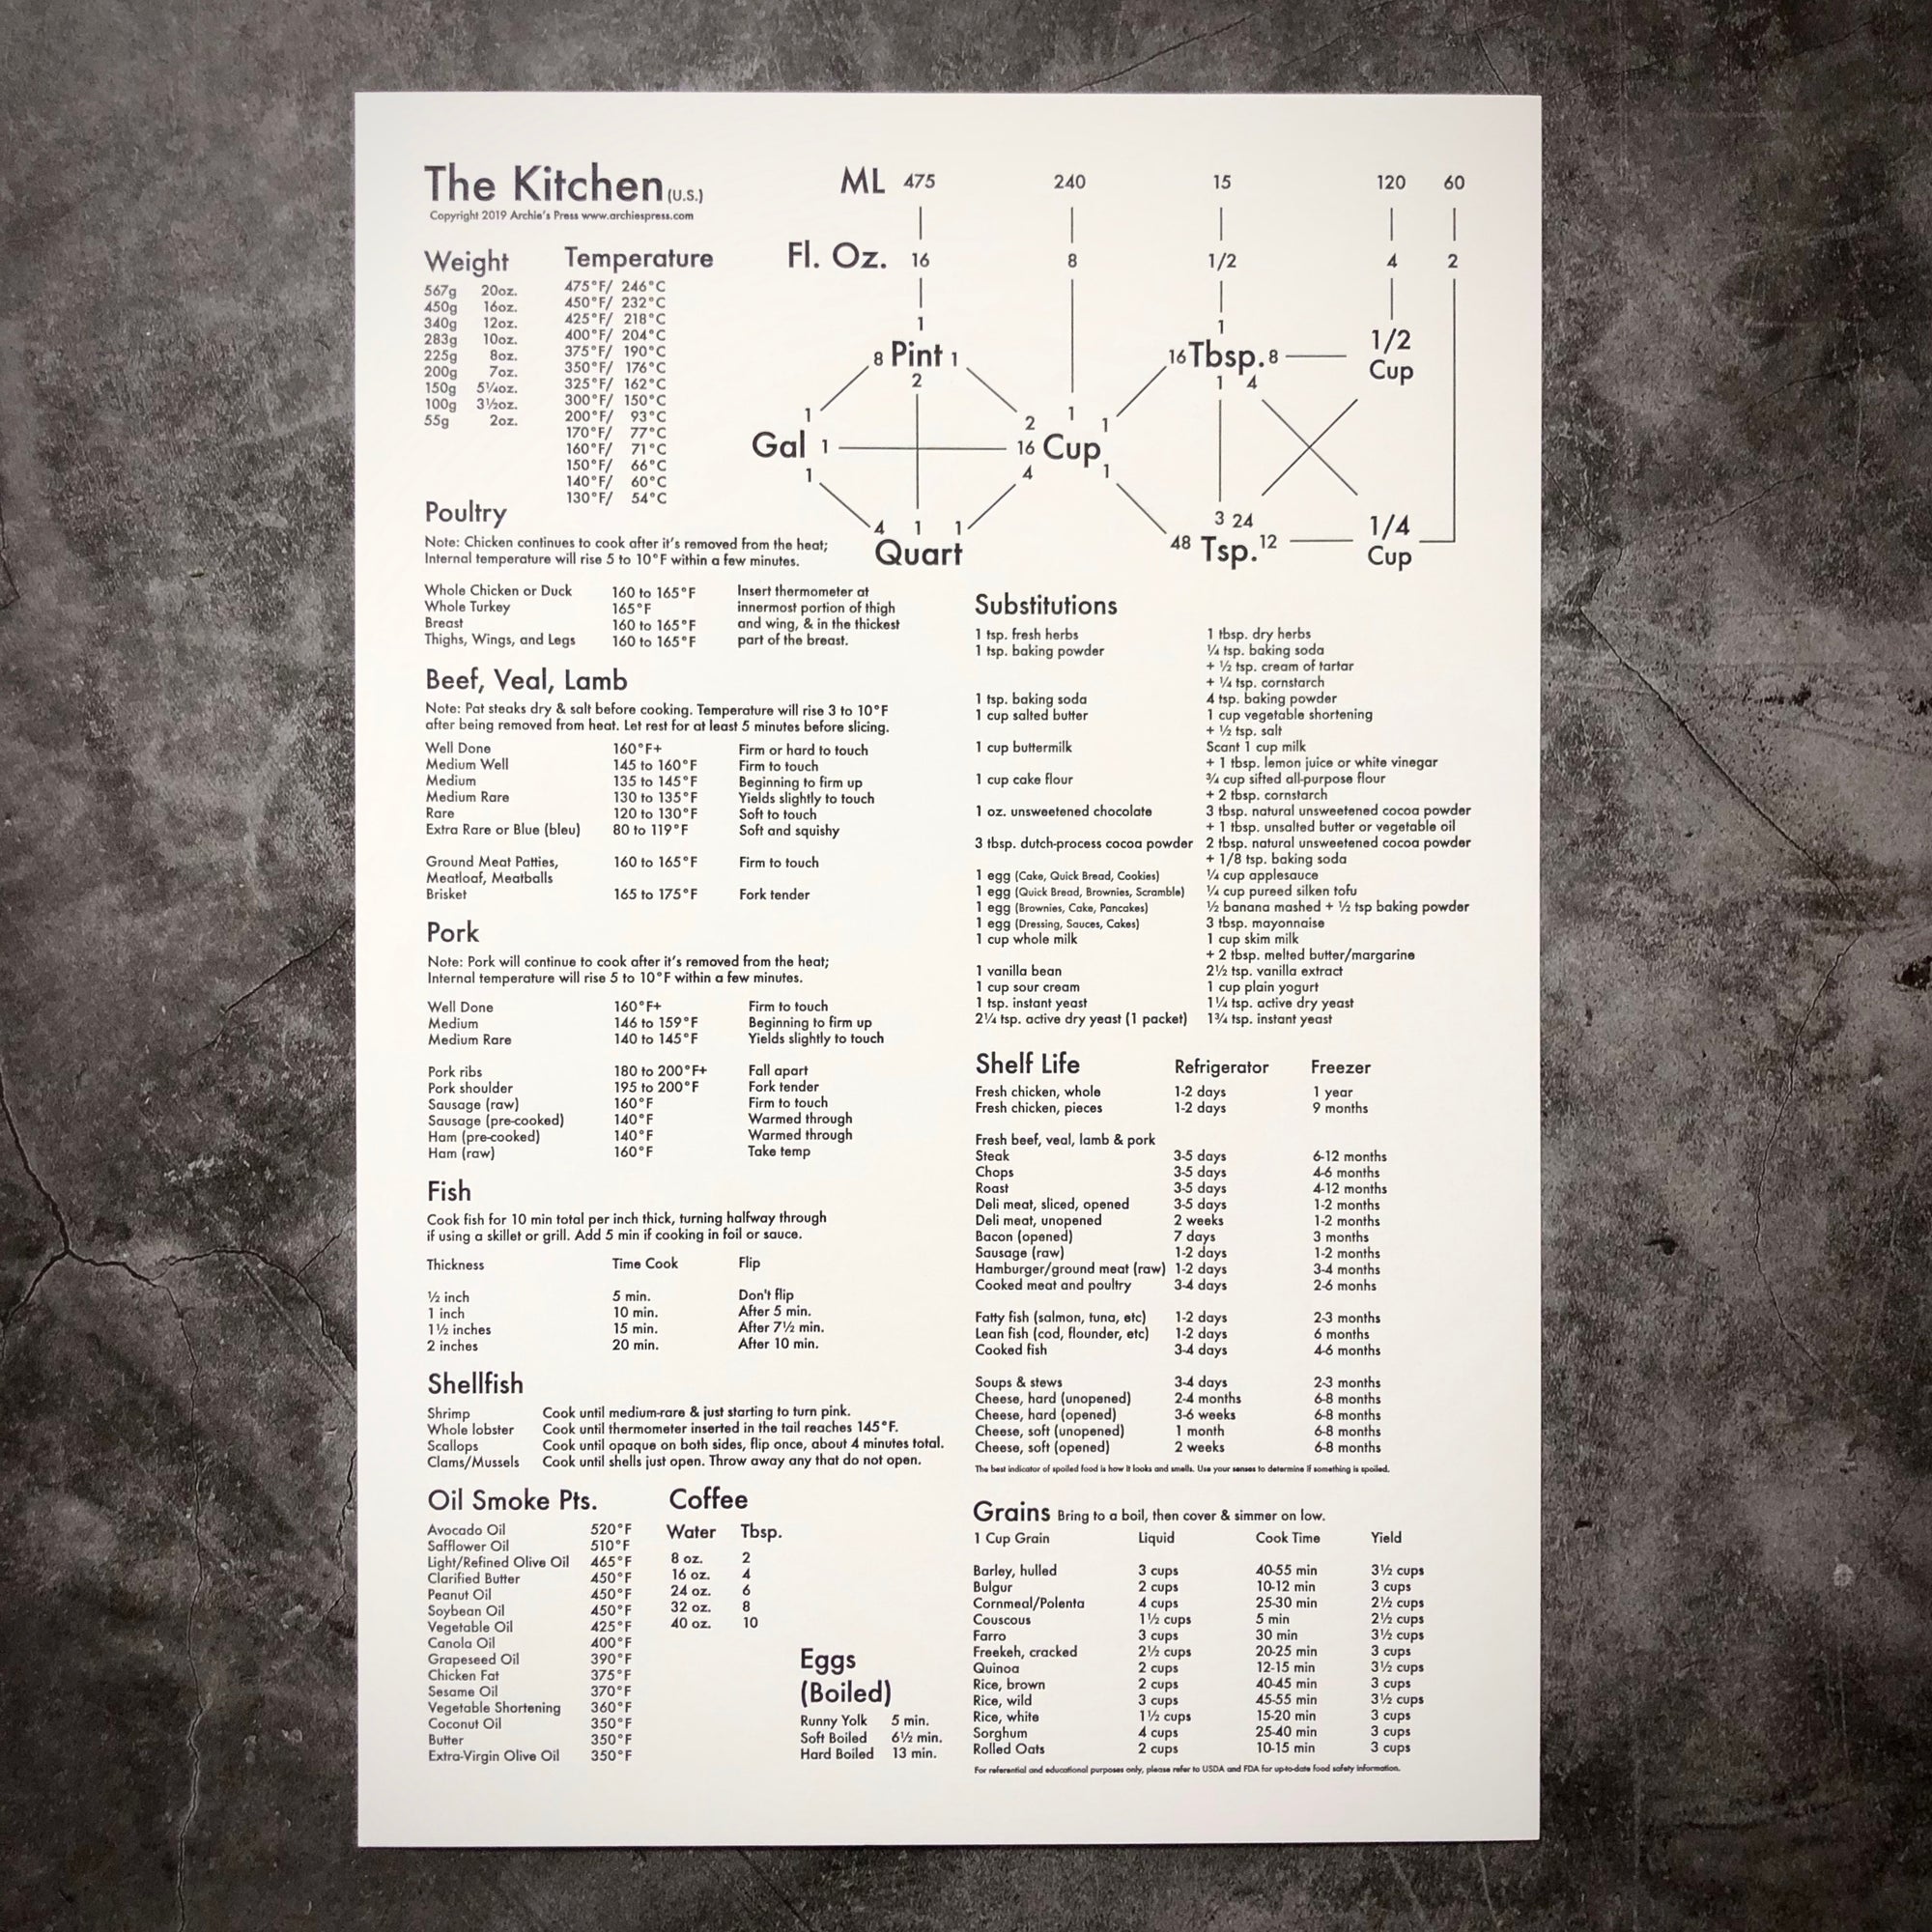 The Kitchen: A Reference Guide letterpress print